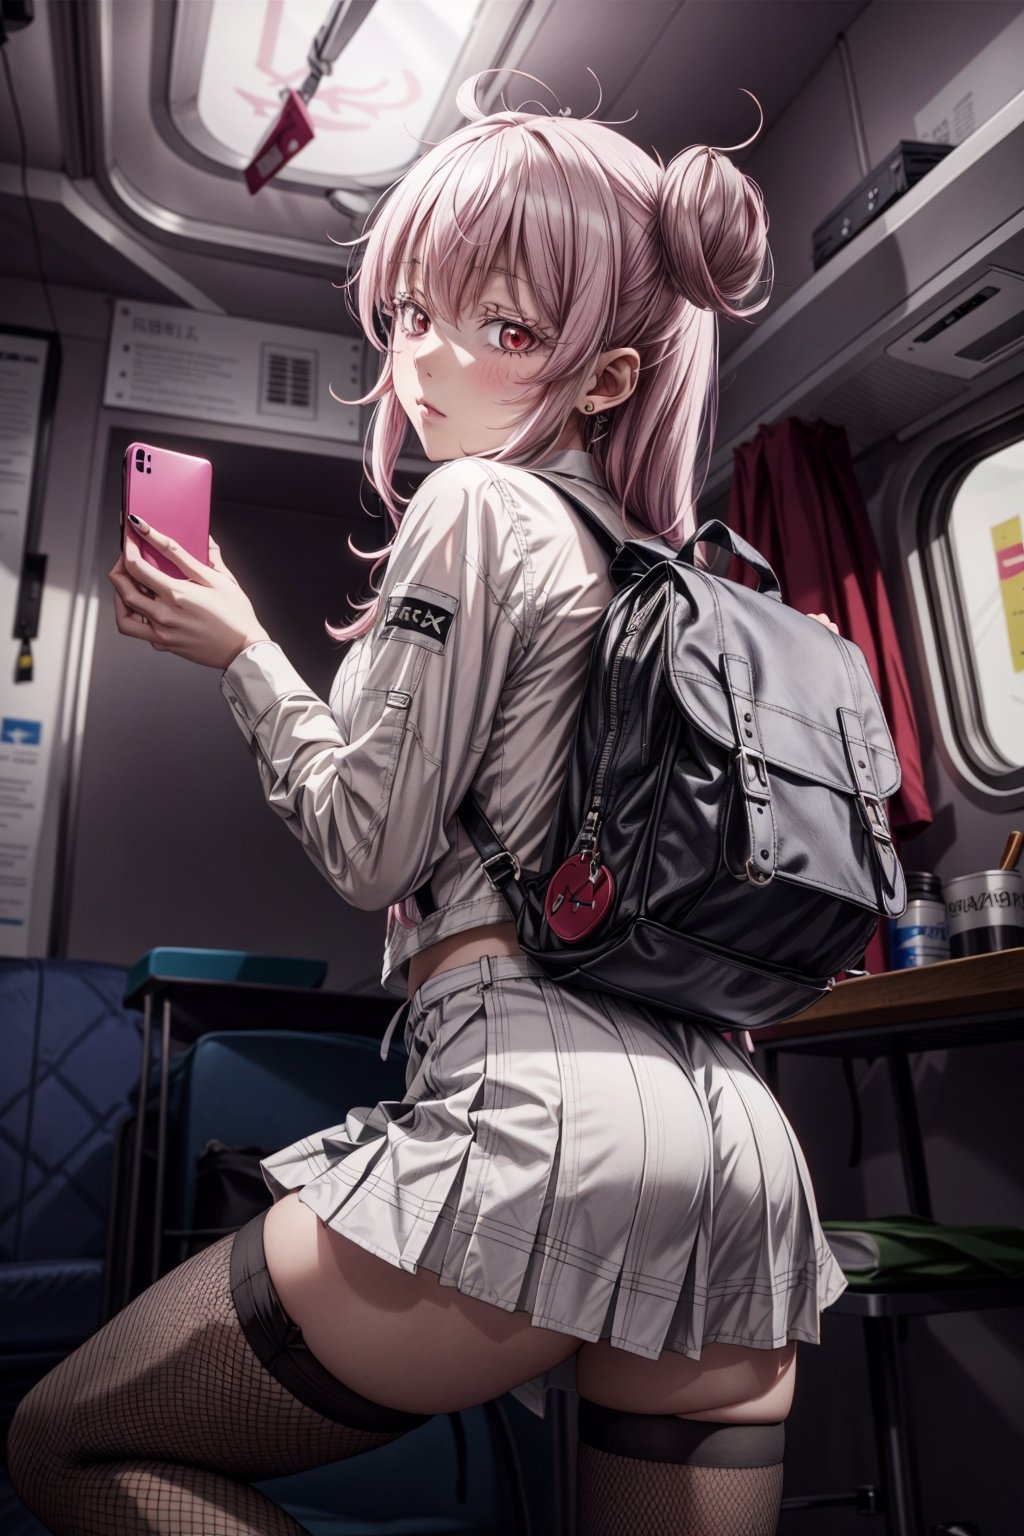 1 girl, ass, alone, thighs, phone, gray skirt, looking at viewer, bag, looking back, skirt, leaning forward, forward, backpack, black hair, cell phone, jacket, inside train, lifting skirt, high heels, ( high heels) holding phone, long hair, lifter, smartphone, holding, bangs, no panties, embarrassed, embarrassed expression, school uniform, anime, more details, dr24amaryllis, photograph taken from far away, photograph taken from a full angle, With cinematic lighting, with full shot, 55 mm lens, production quality, depth of field, cinematographic photography, professional color grading, exquisite details, sharpness. -focus, intricately detailed, f/2.8, realistic photography, real lighting, studio lighting, decorative lighting, GB shift, ray tracing, antialiasing, FKAA, TXAA, RTX, SSAO, Shaders, tone mapping, CGI, VFX , SFX,stockings,goth girl